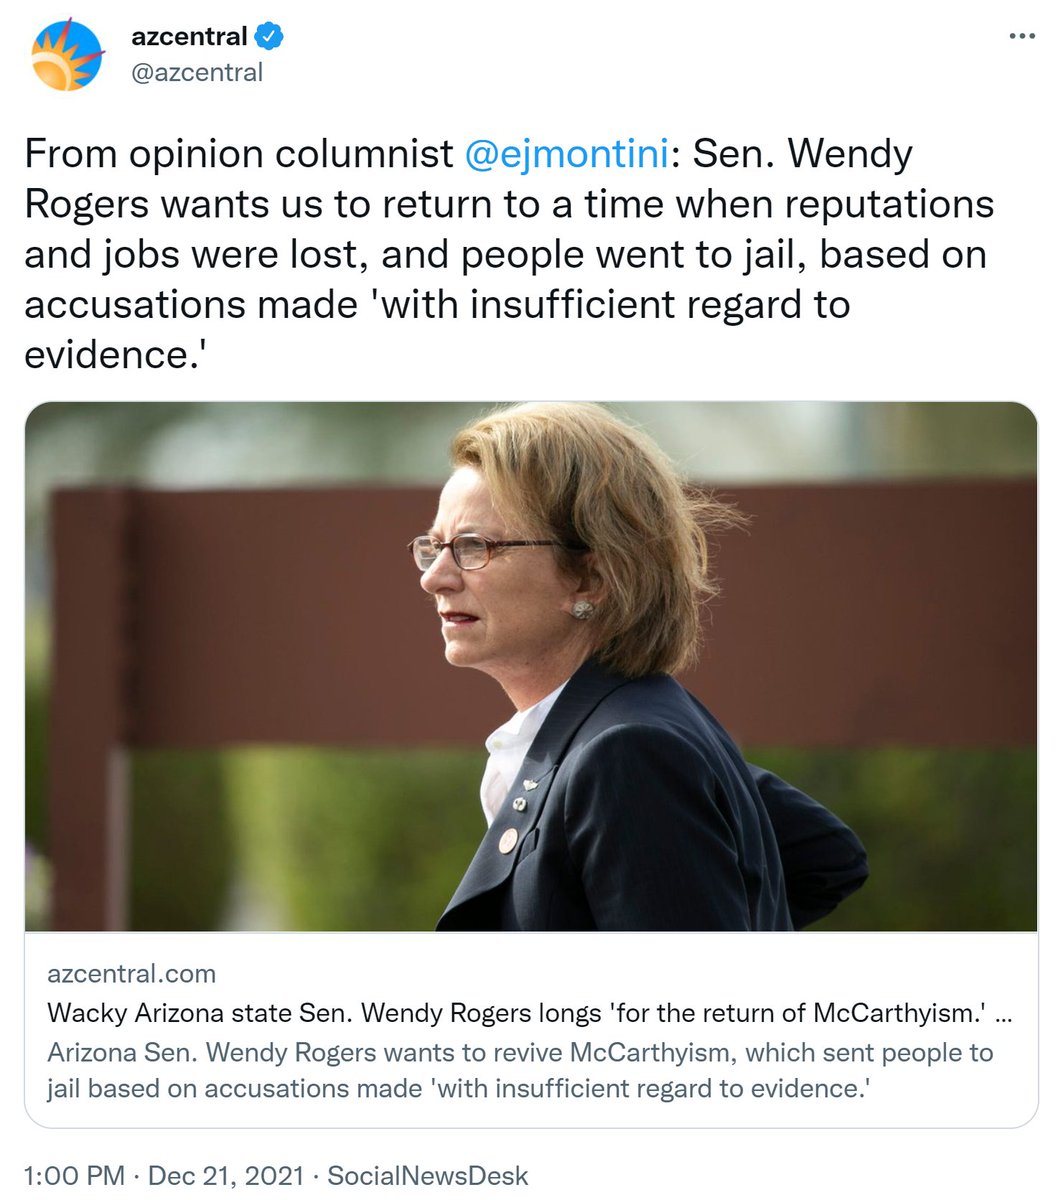 RT @WendyRogersAZ: Bring back McCarthyism. Fire and defeat the communists. https://t.co/VIsajOtFkm